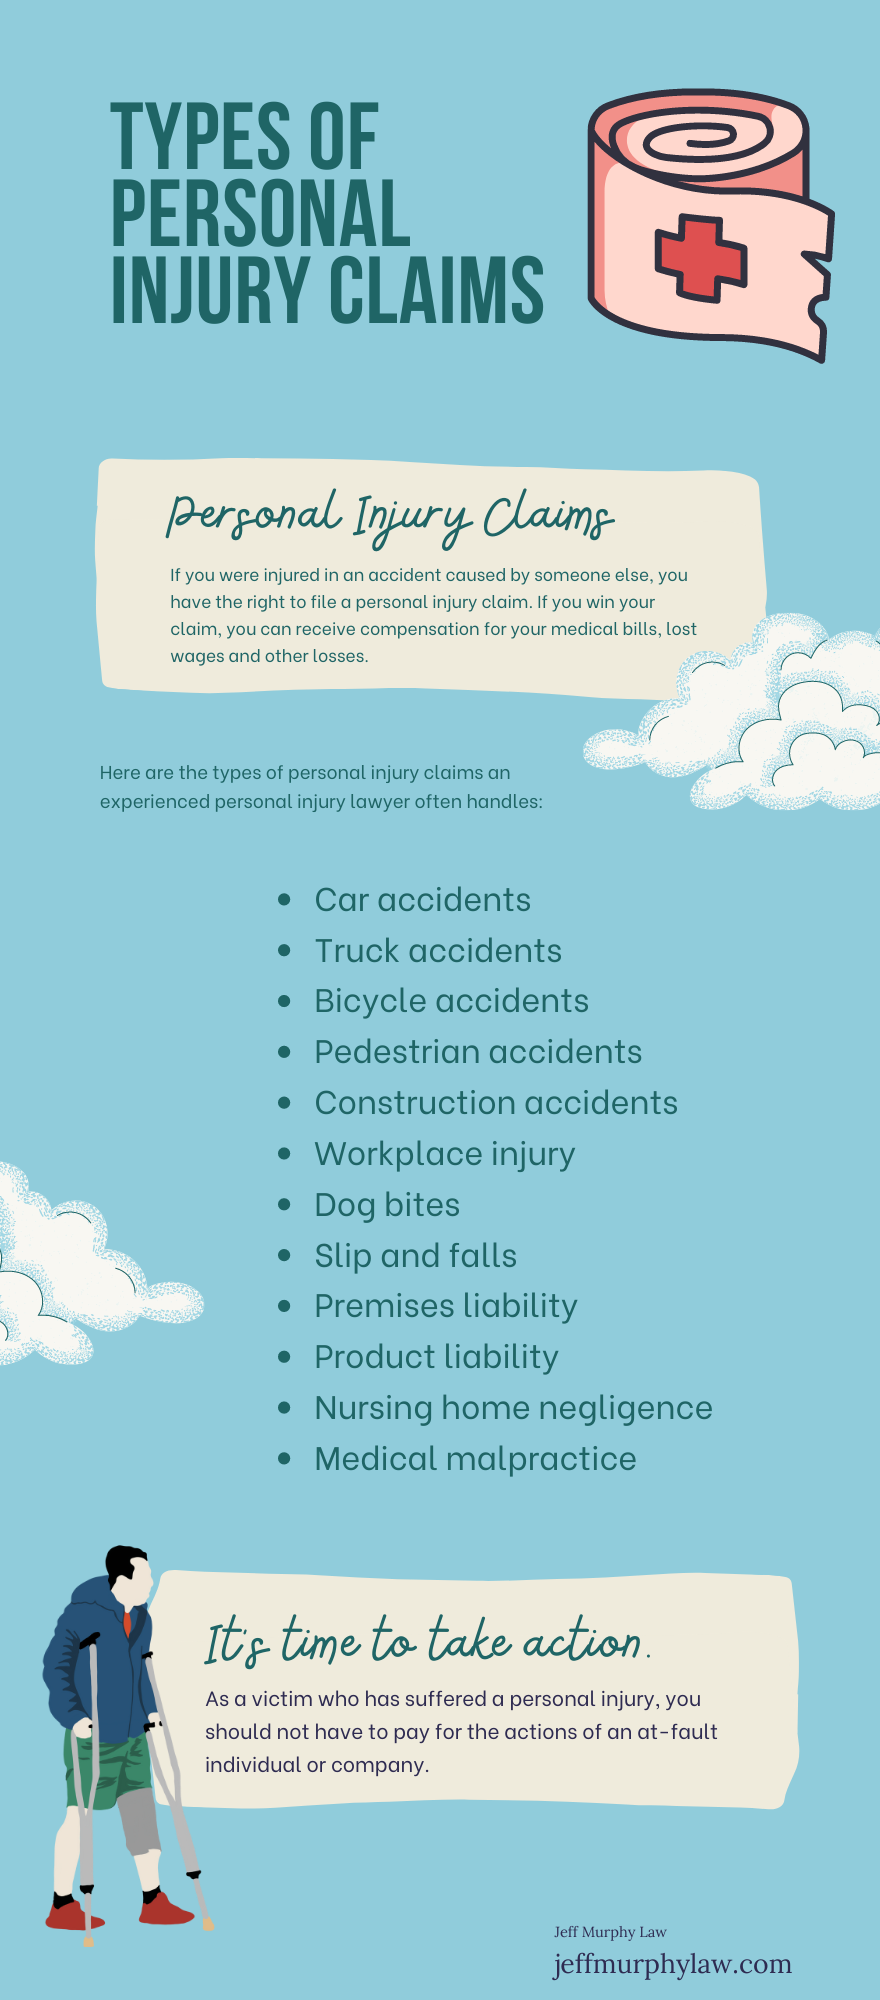 Types of Personal Injury Claims Infographic